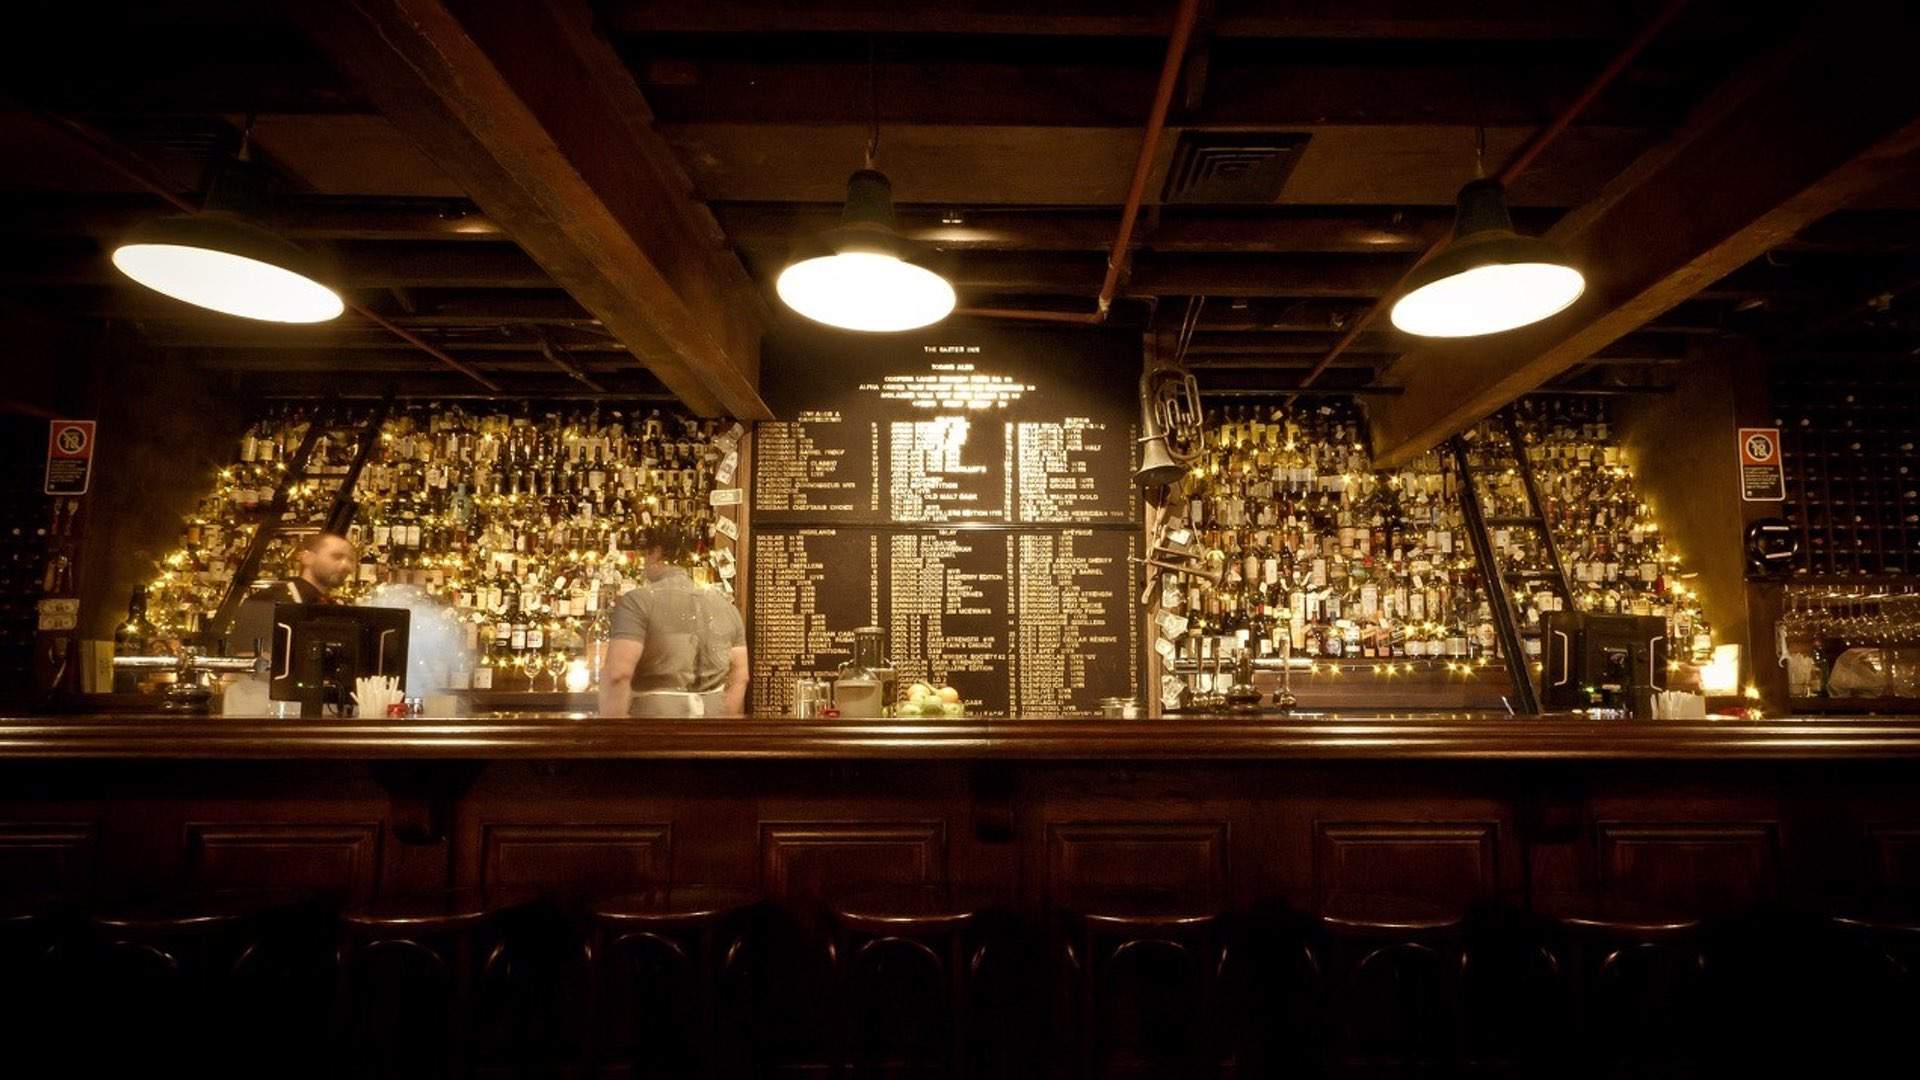 The whisky bar at the baxter's inn - one of the best bars in Sydney